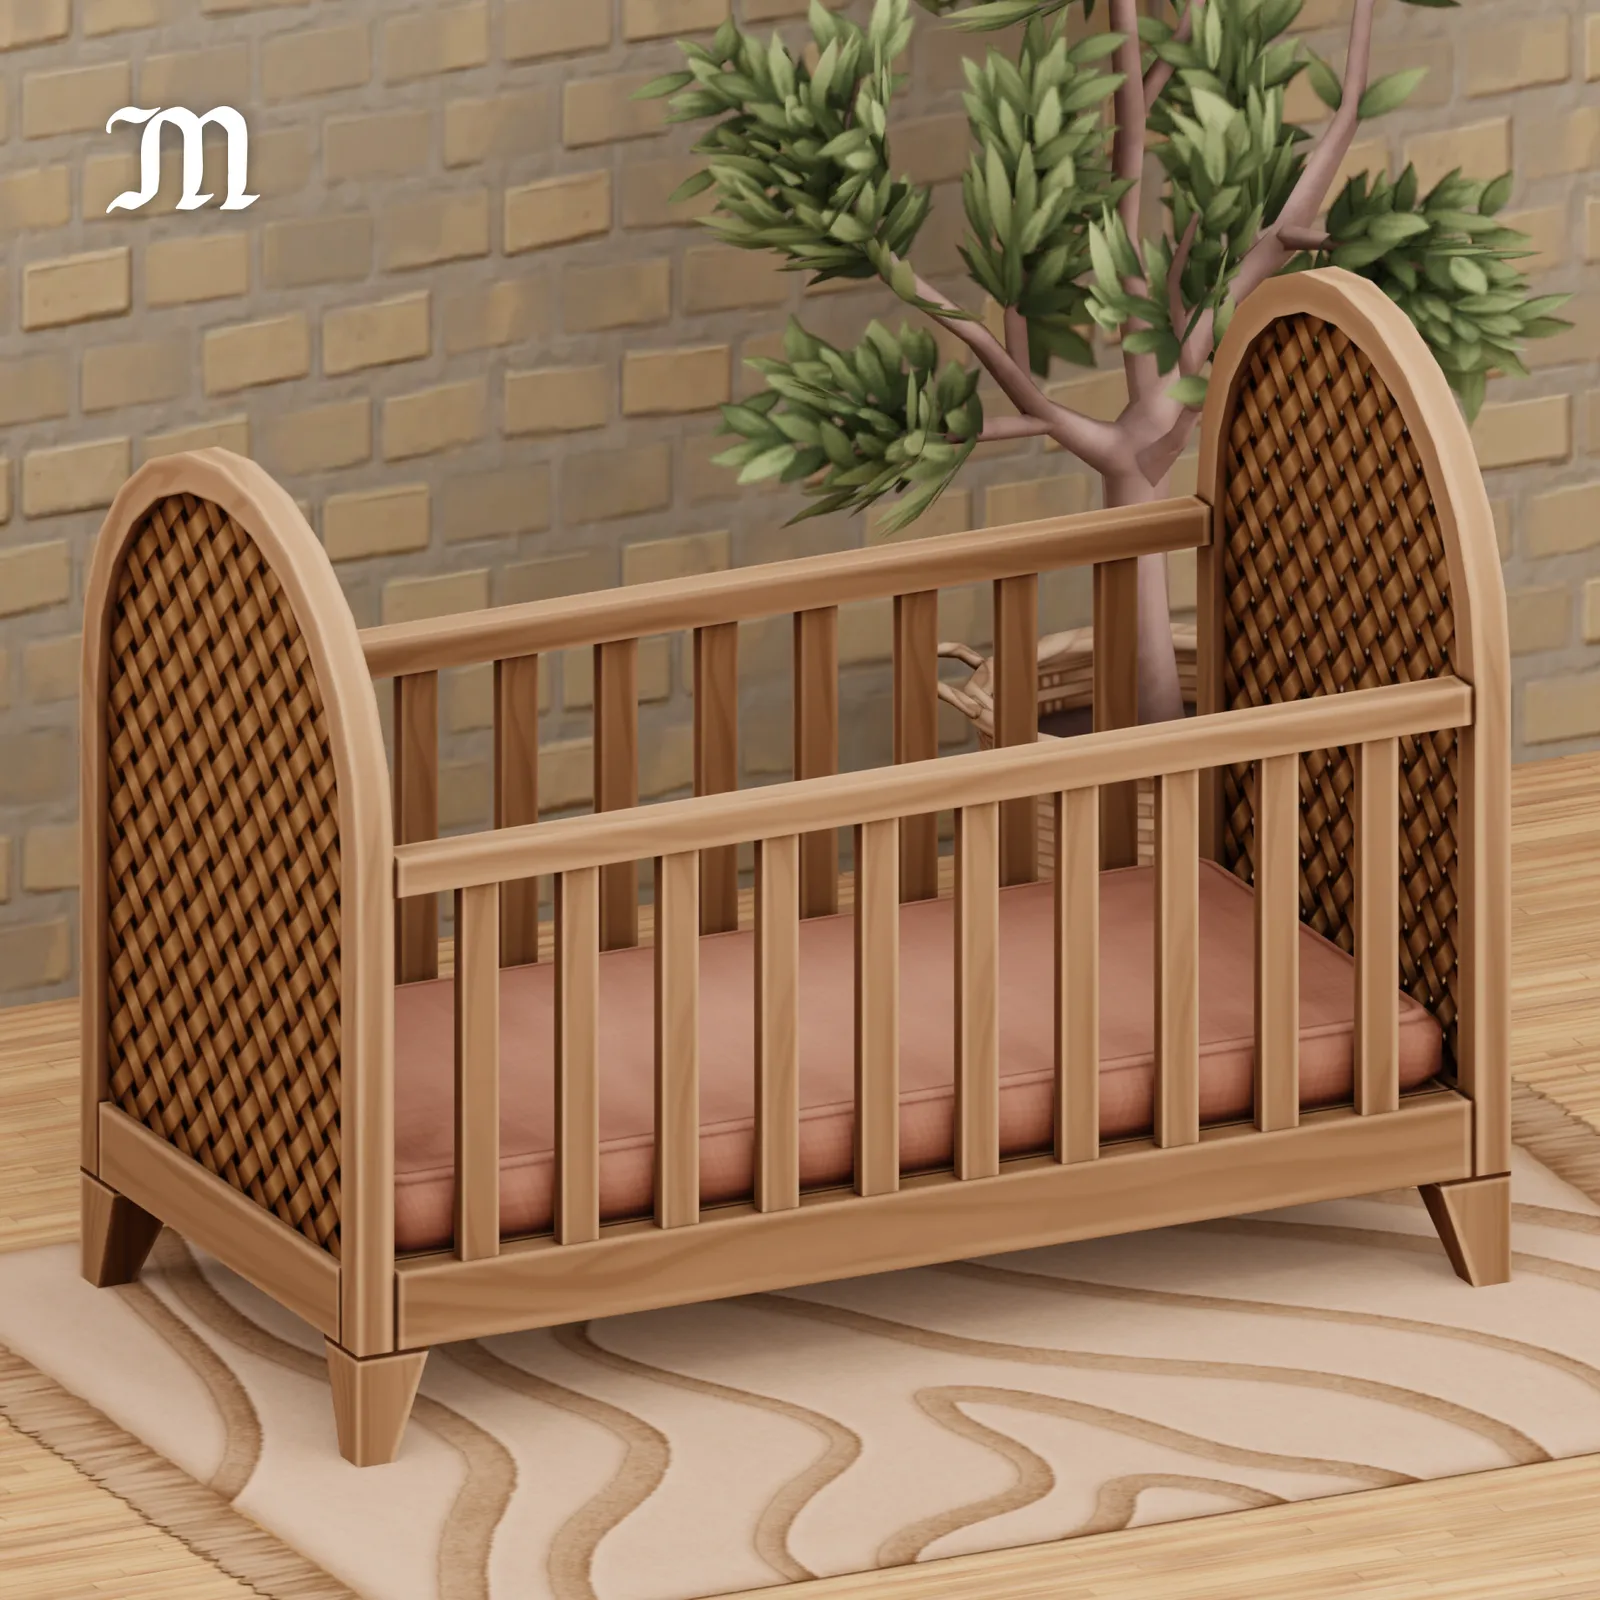 Freja Crib (Improved and Functional)